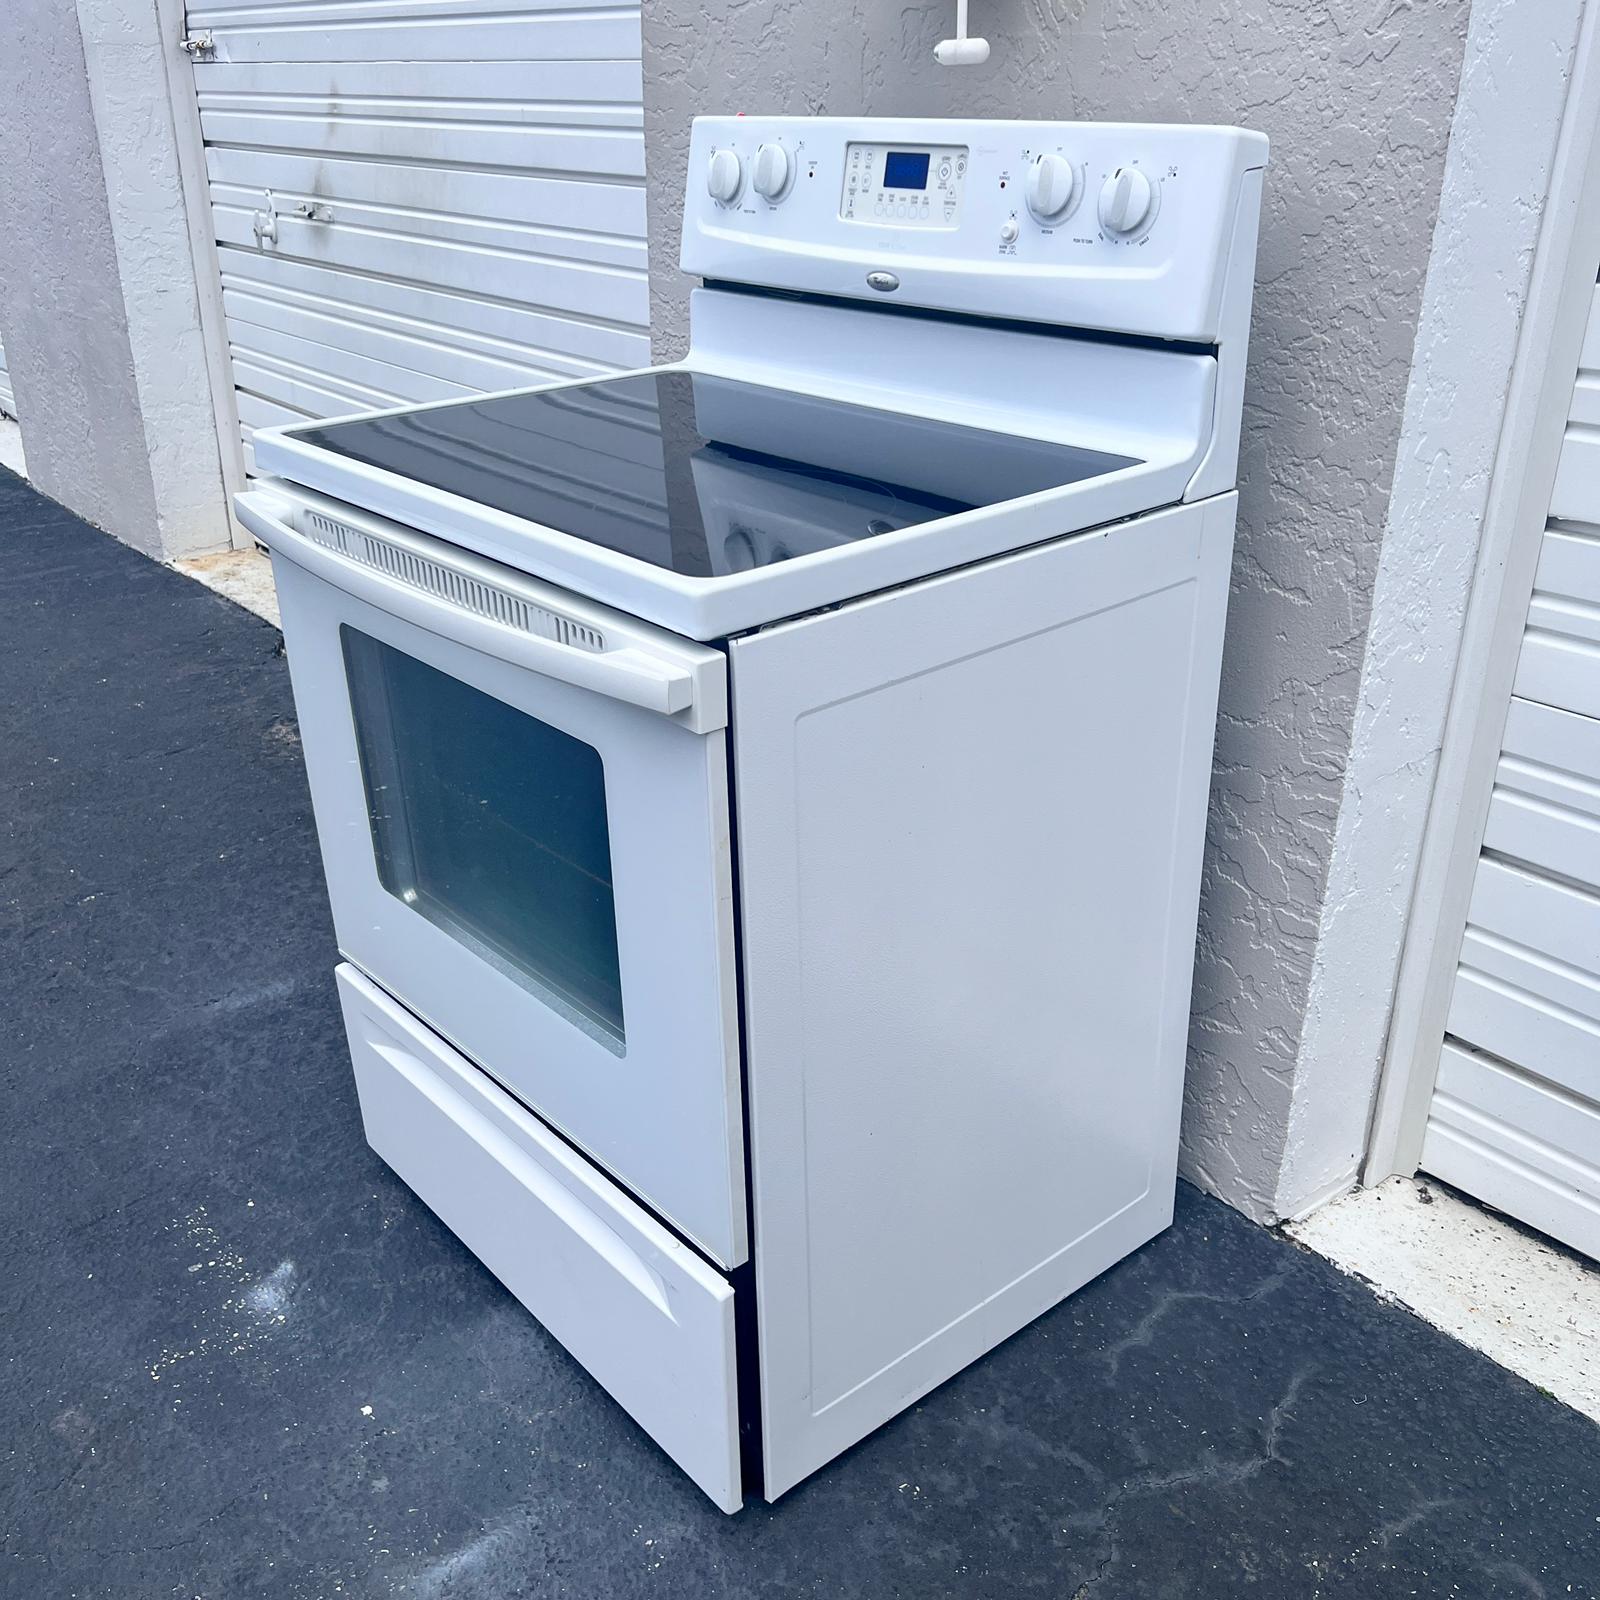 Whirlpool Electric Stove - Steam Clean Oven